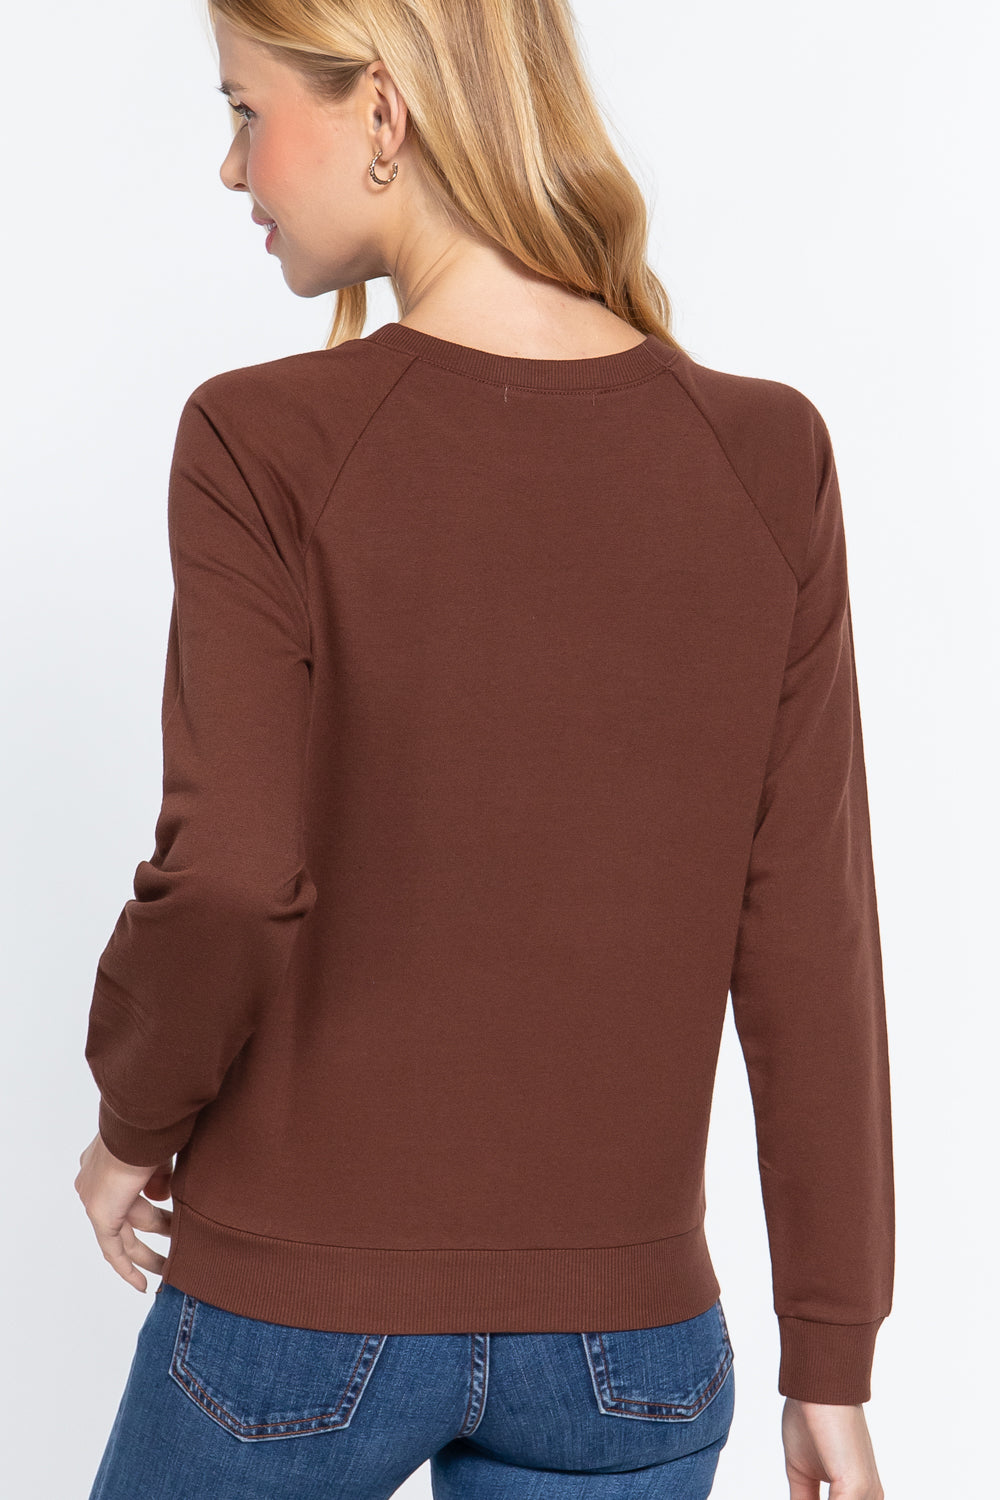 Sequins French Terry Pullover Top - Tigbuls Variety Fashion